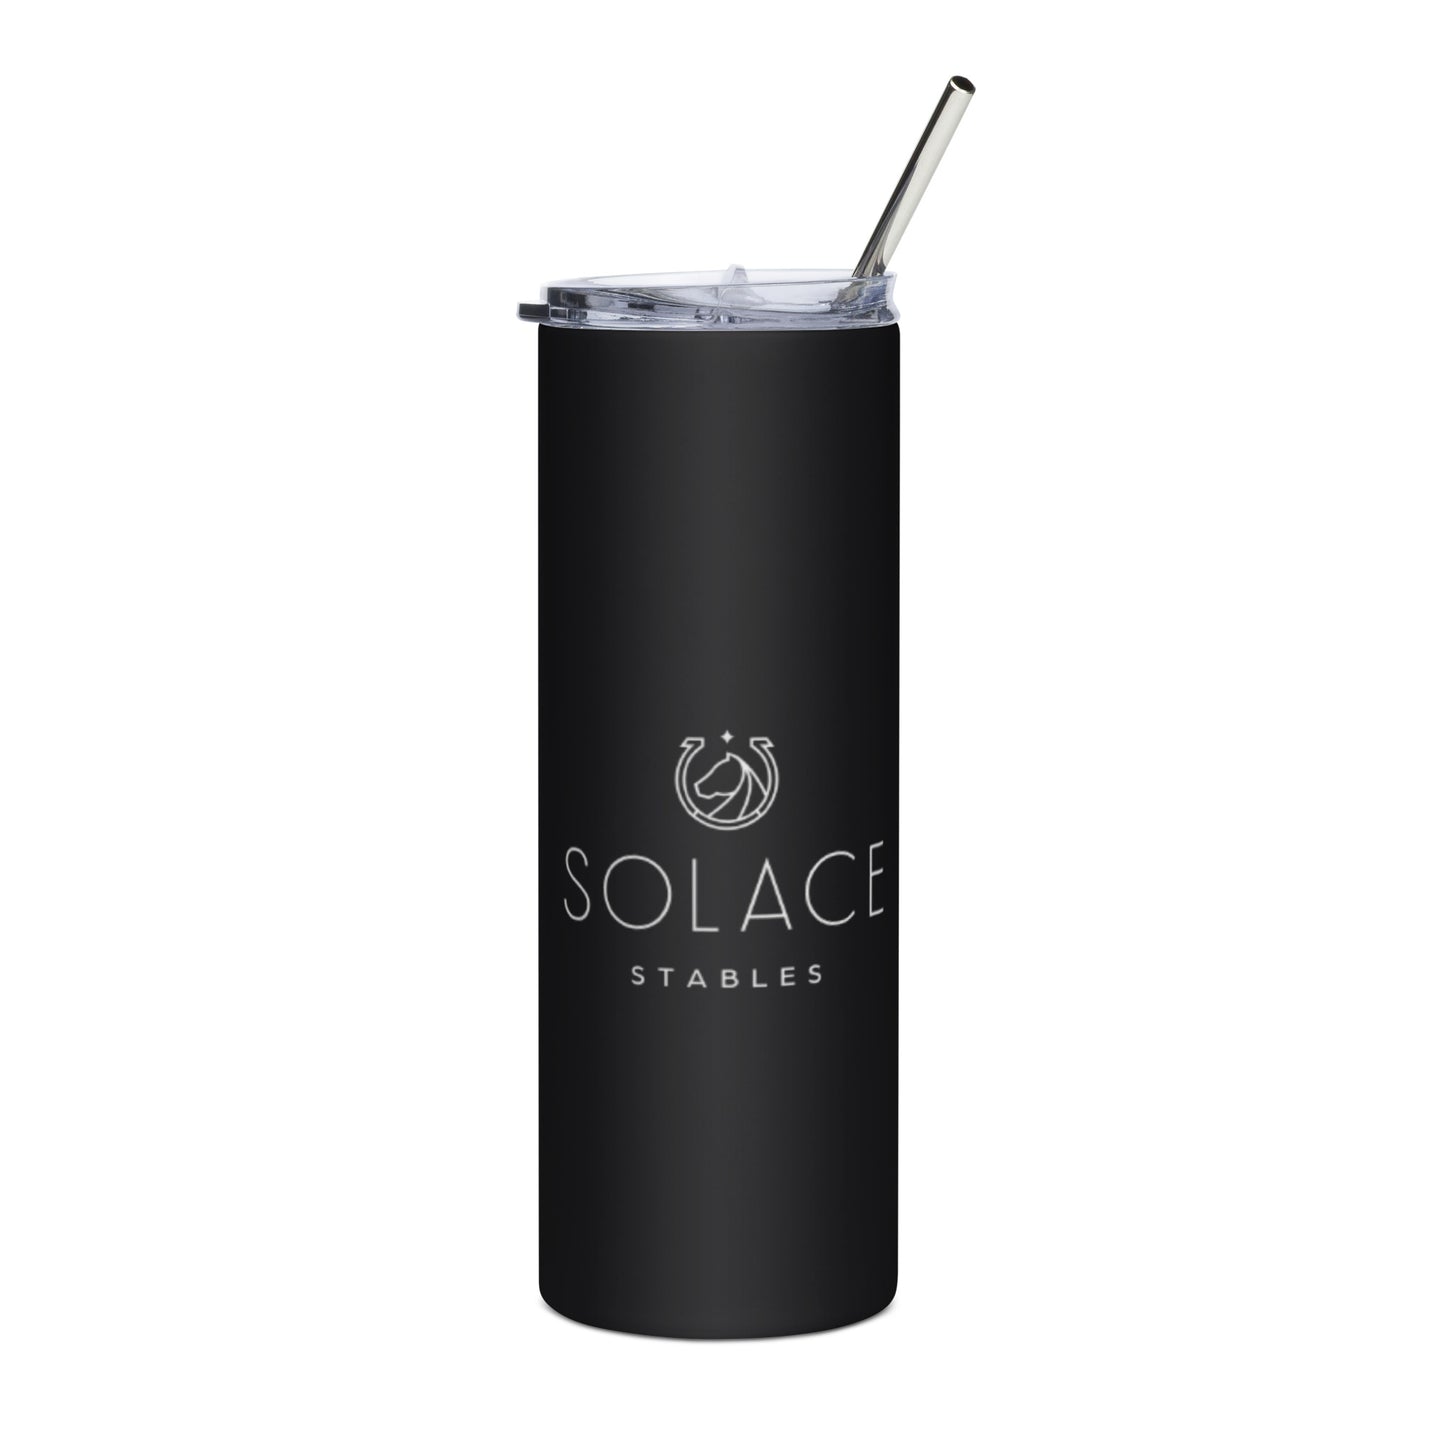 Tall Tumbler "SOLACE STABLES" in Classic White on Basic Black